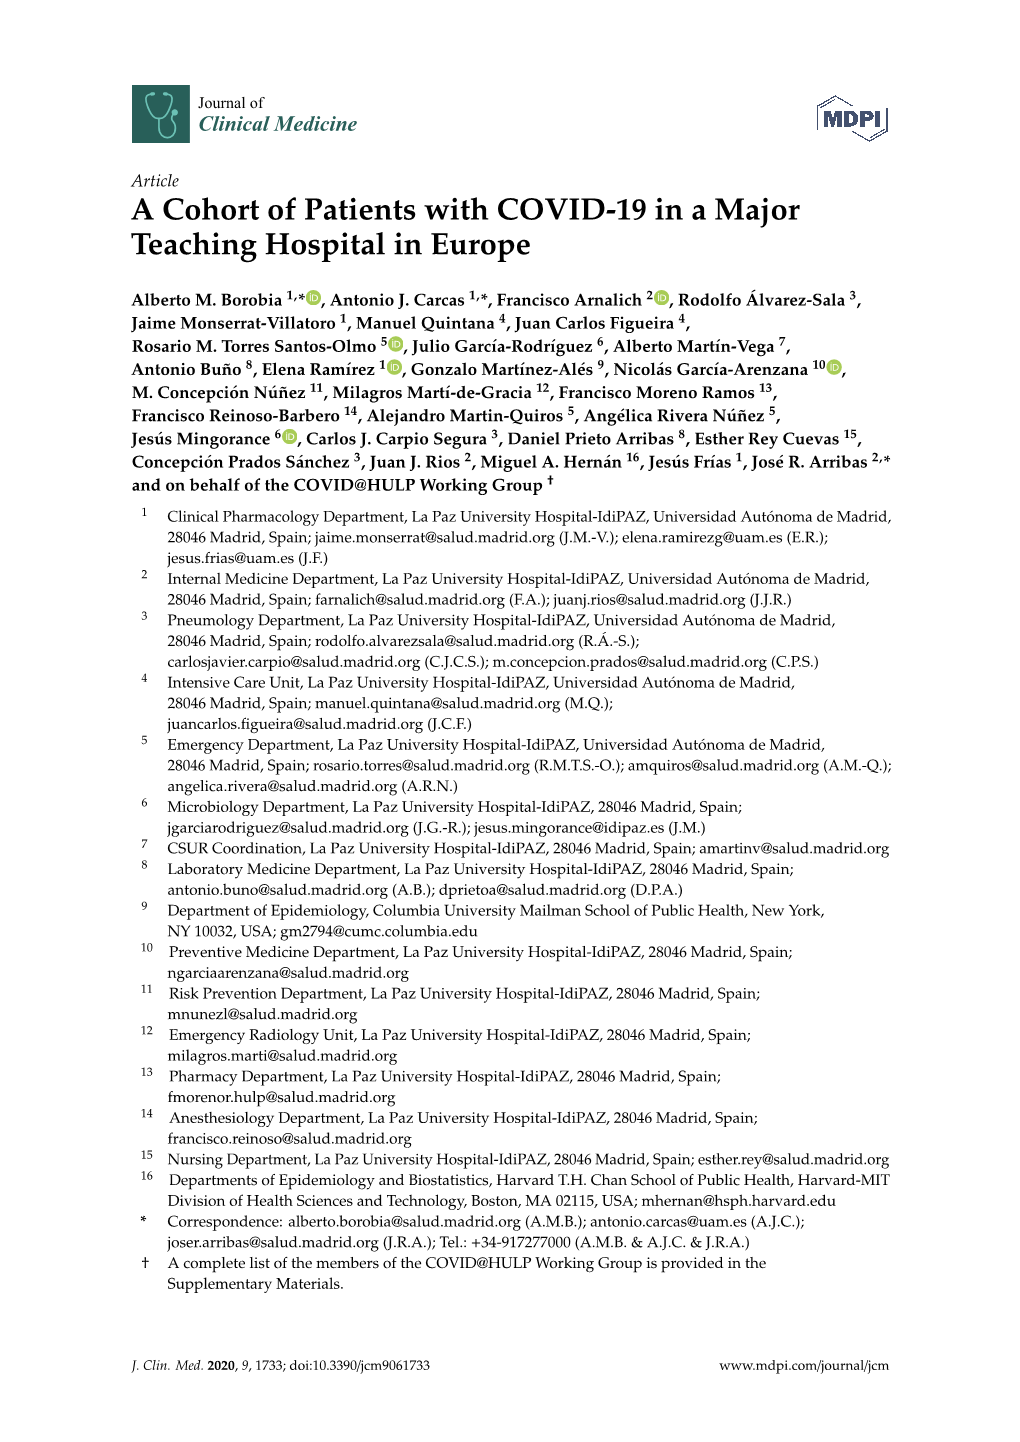 A Cohort of Patients with COVID-19 in a Major Teaching Hospital in Europe